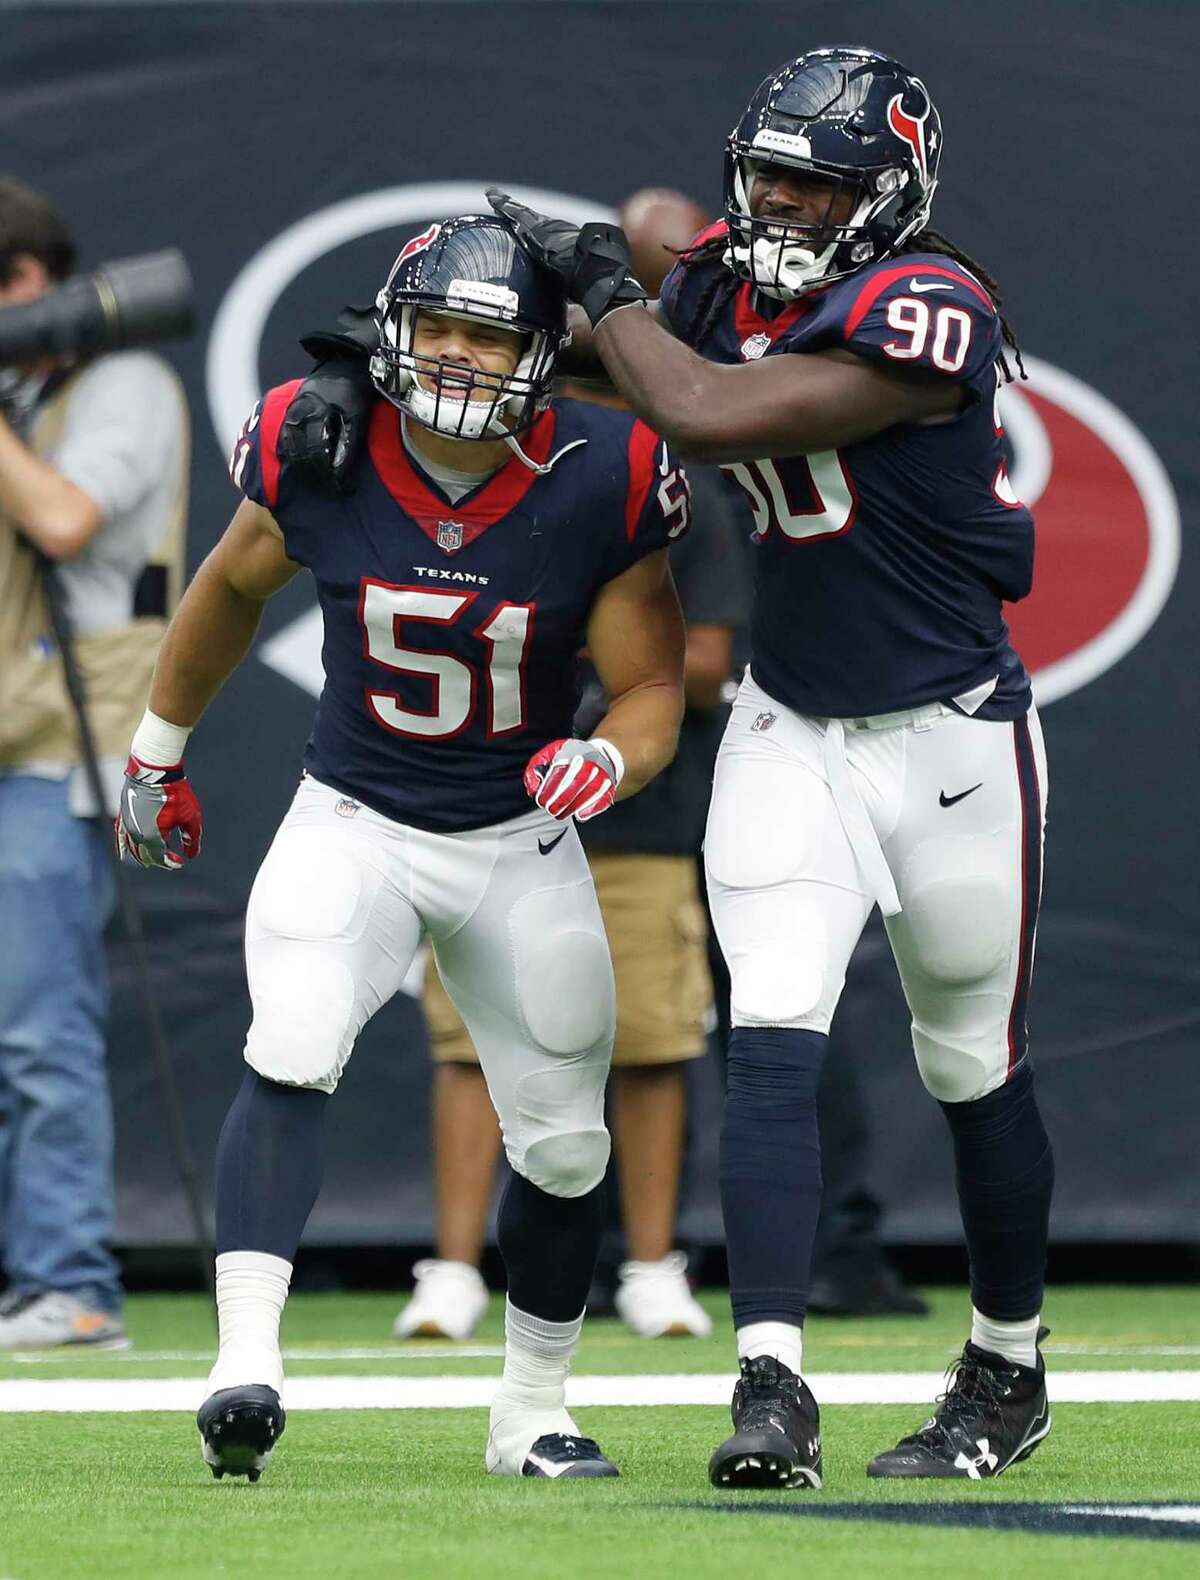 The Texans' Dylan Cole (51) celebrates his fourth-quarter touchdown off a 25-yard interception return with fellow linebacker Jadeveon Clowney.